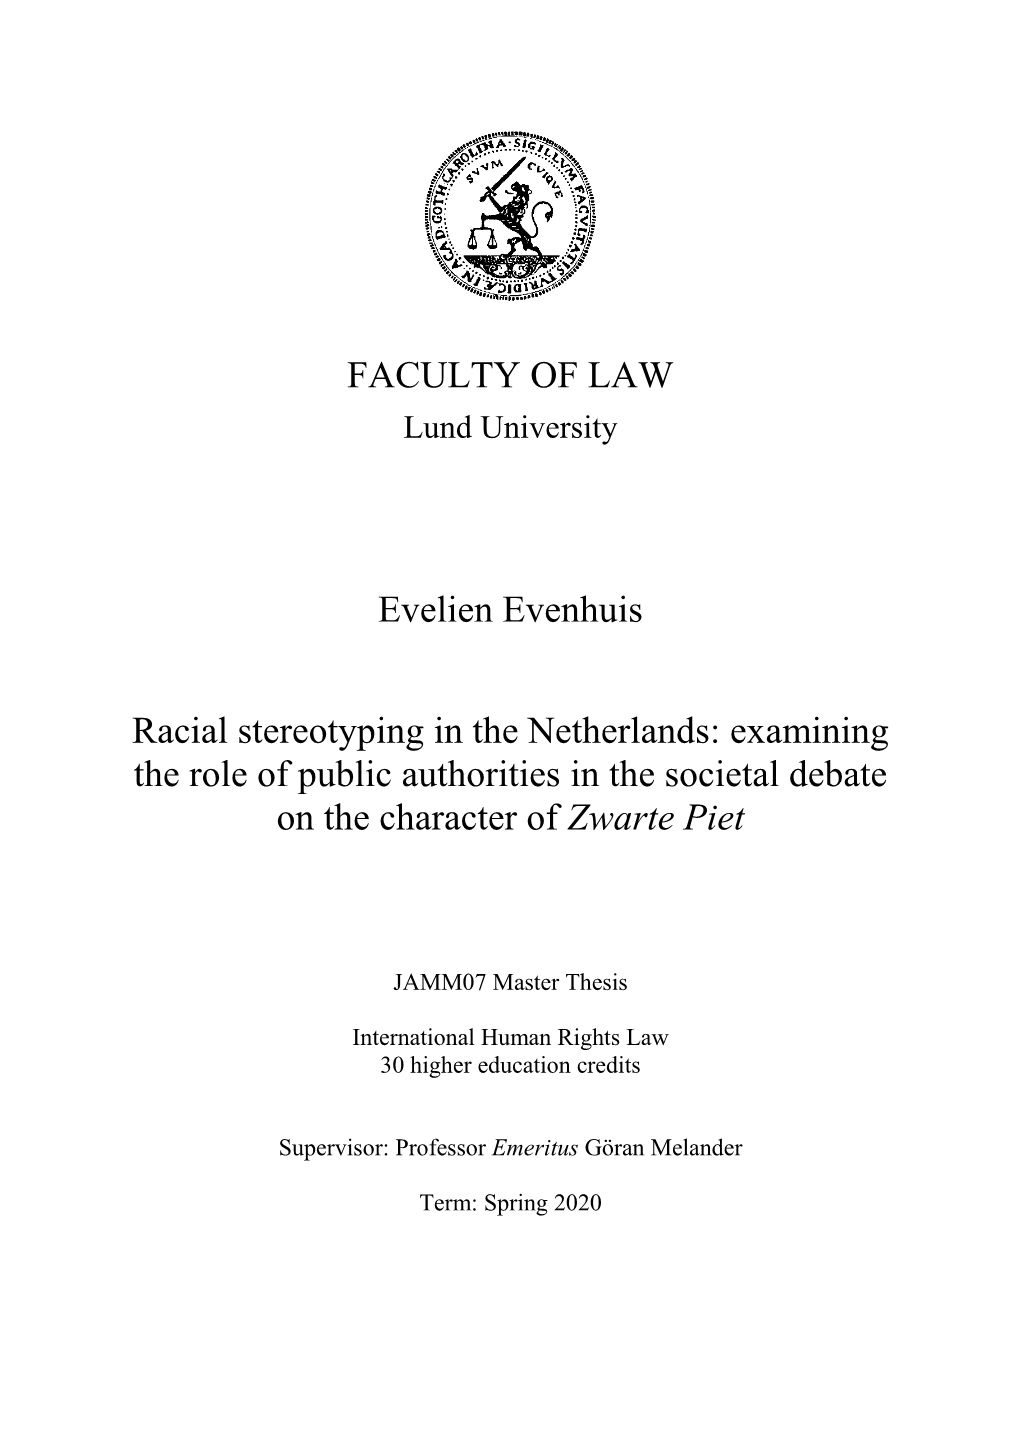 FACULTY of LAW Evelien Evenhuis